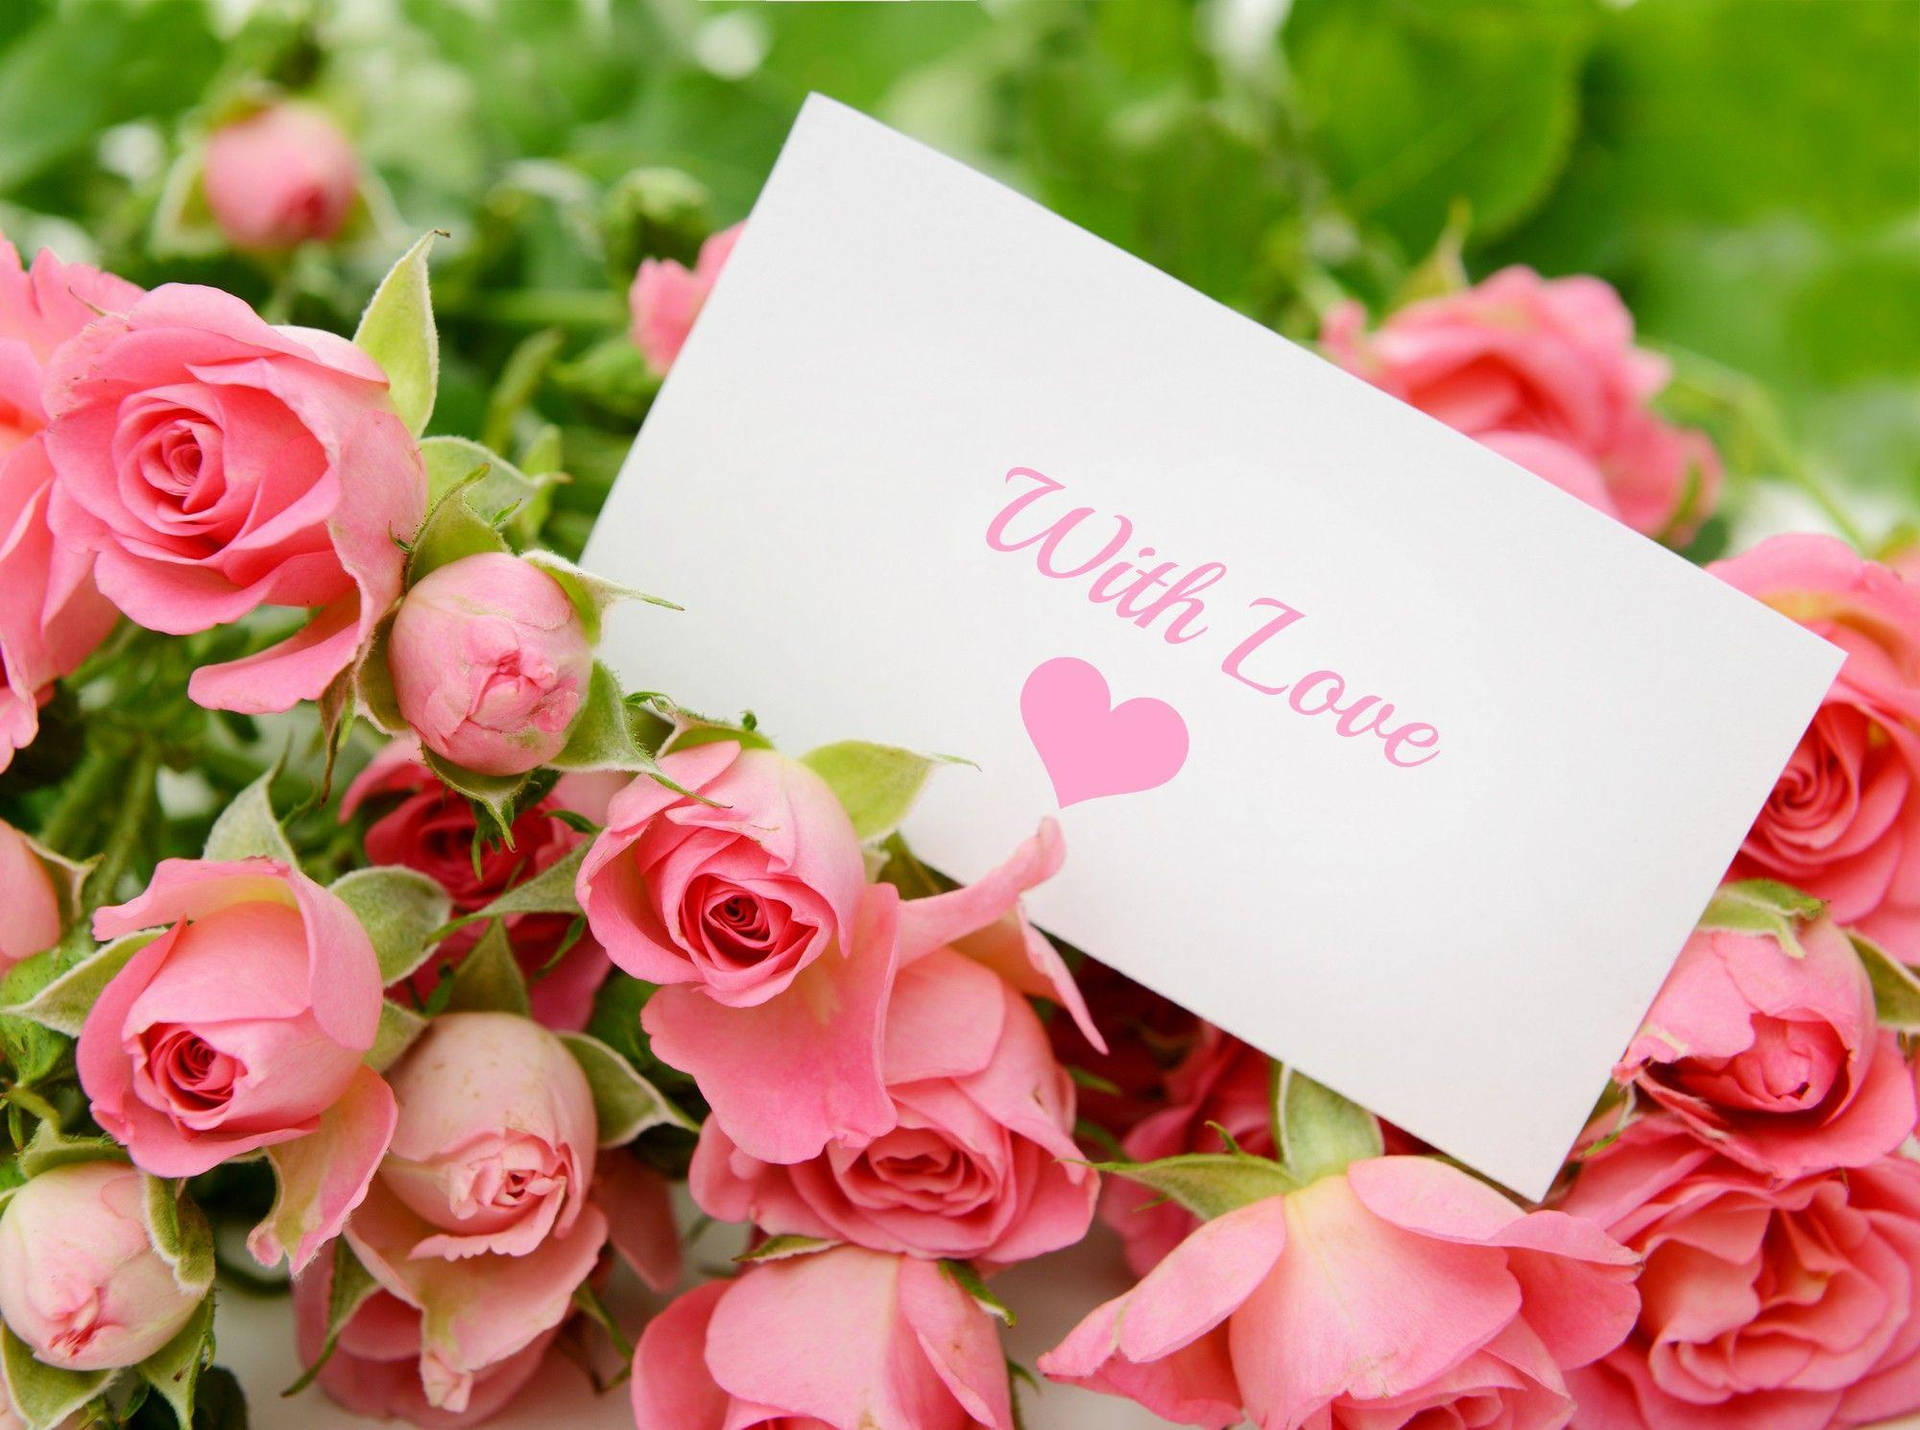 With Love Rose Card Picture